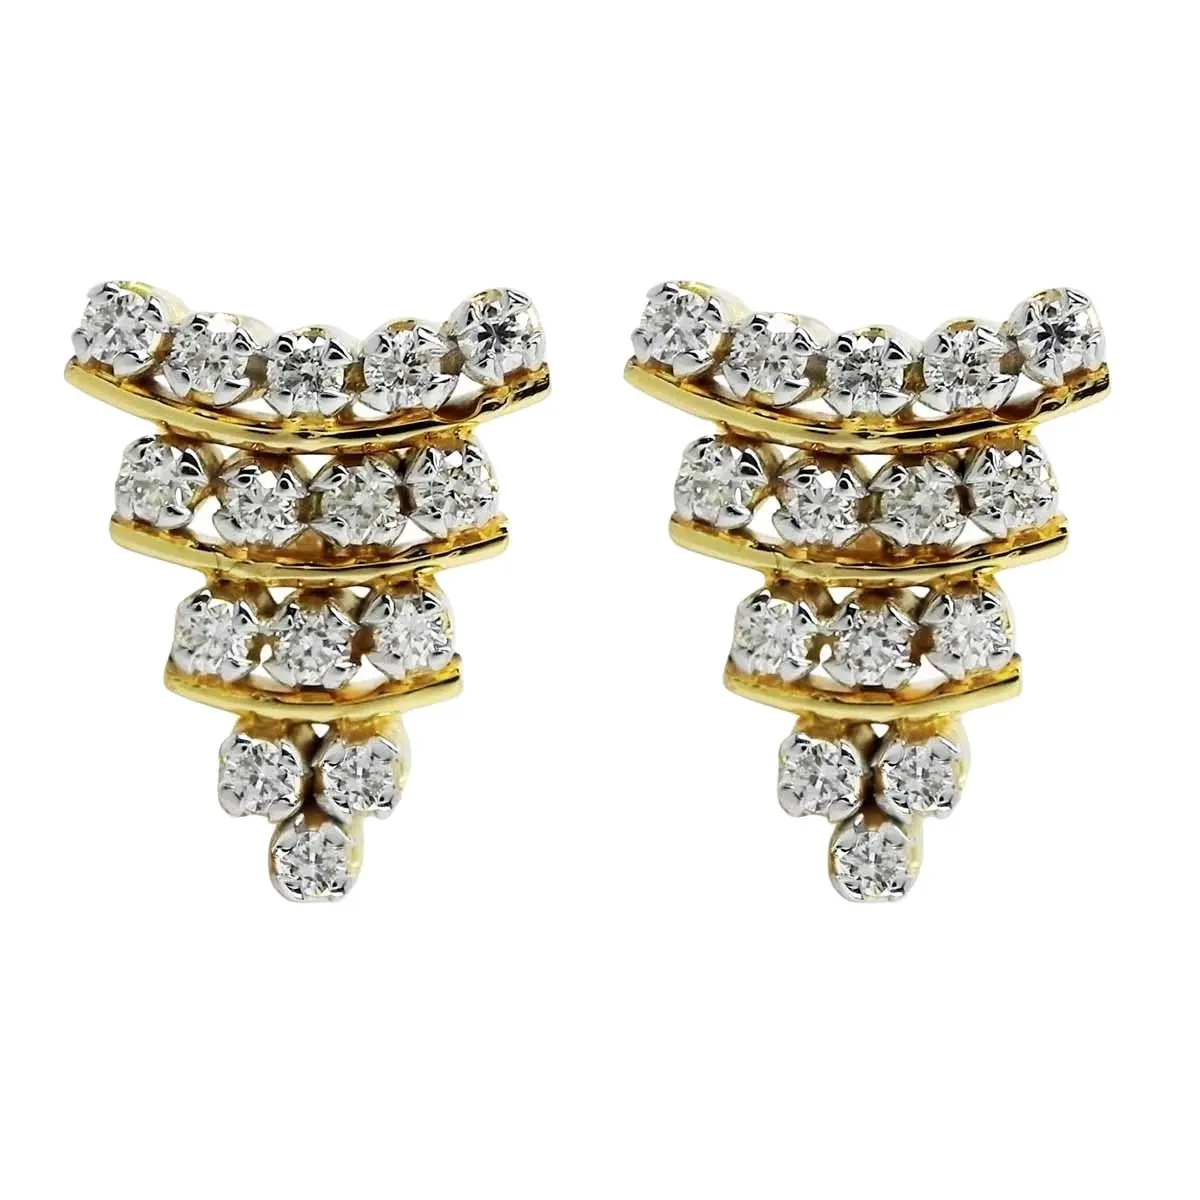 IGI & Ingemco Certified Real Diamond Drop Earring for Women's at Wholesale price by Djewels Top Diamond Jewellery Shop in India